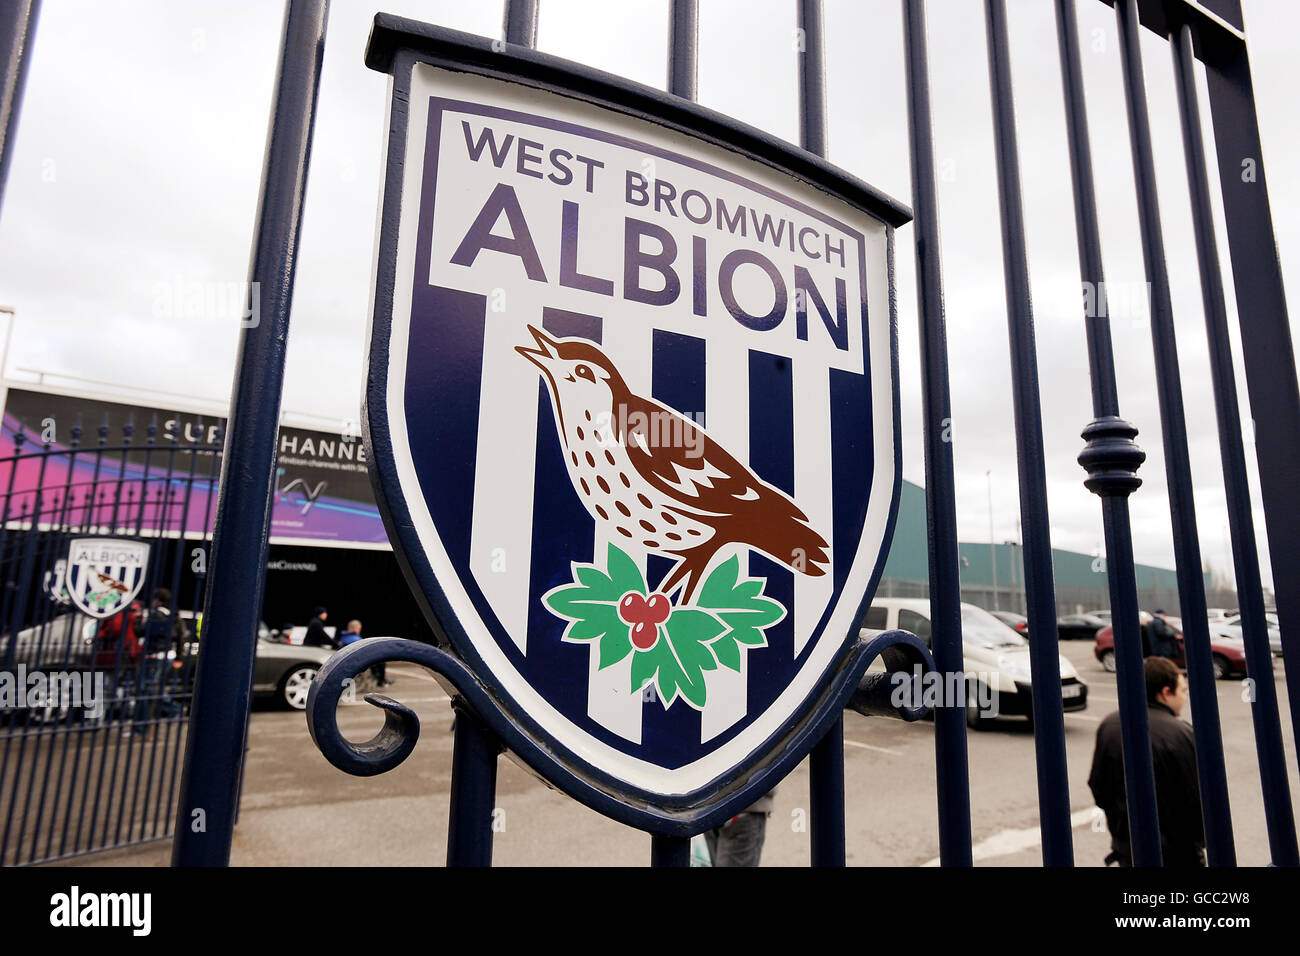 According Sky Sports presenter: West Brom striker had an “incredible” chance to give his club the lead in the second half of their clash with Watford….